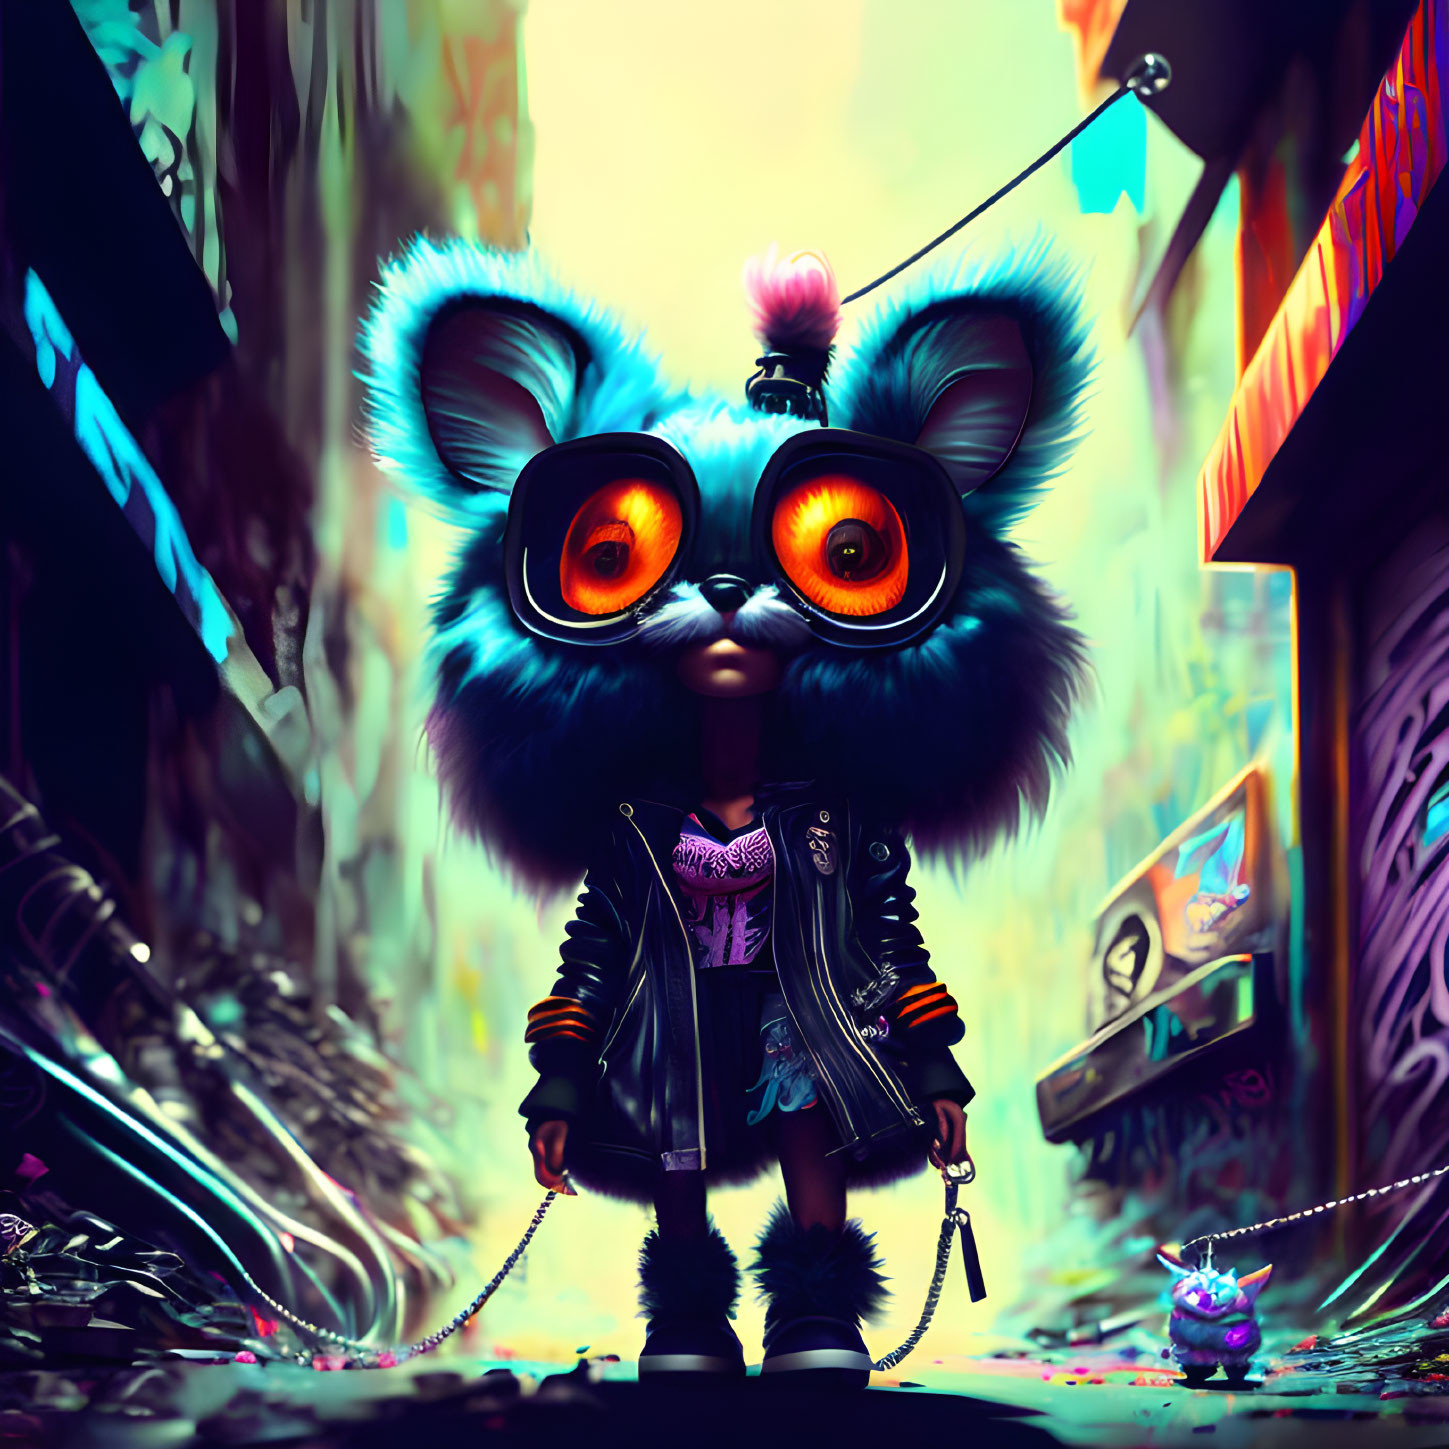 Anthropomorphic Creature in Black Jacket with Leash in Neon Alley